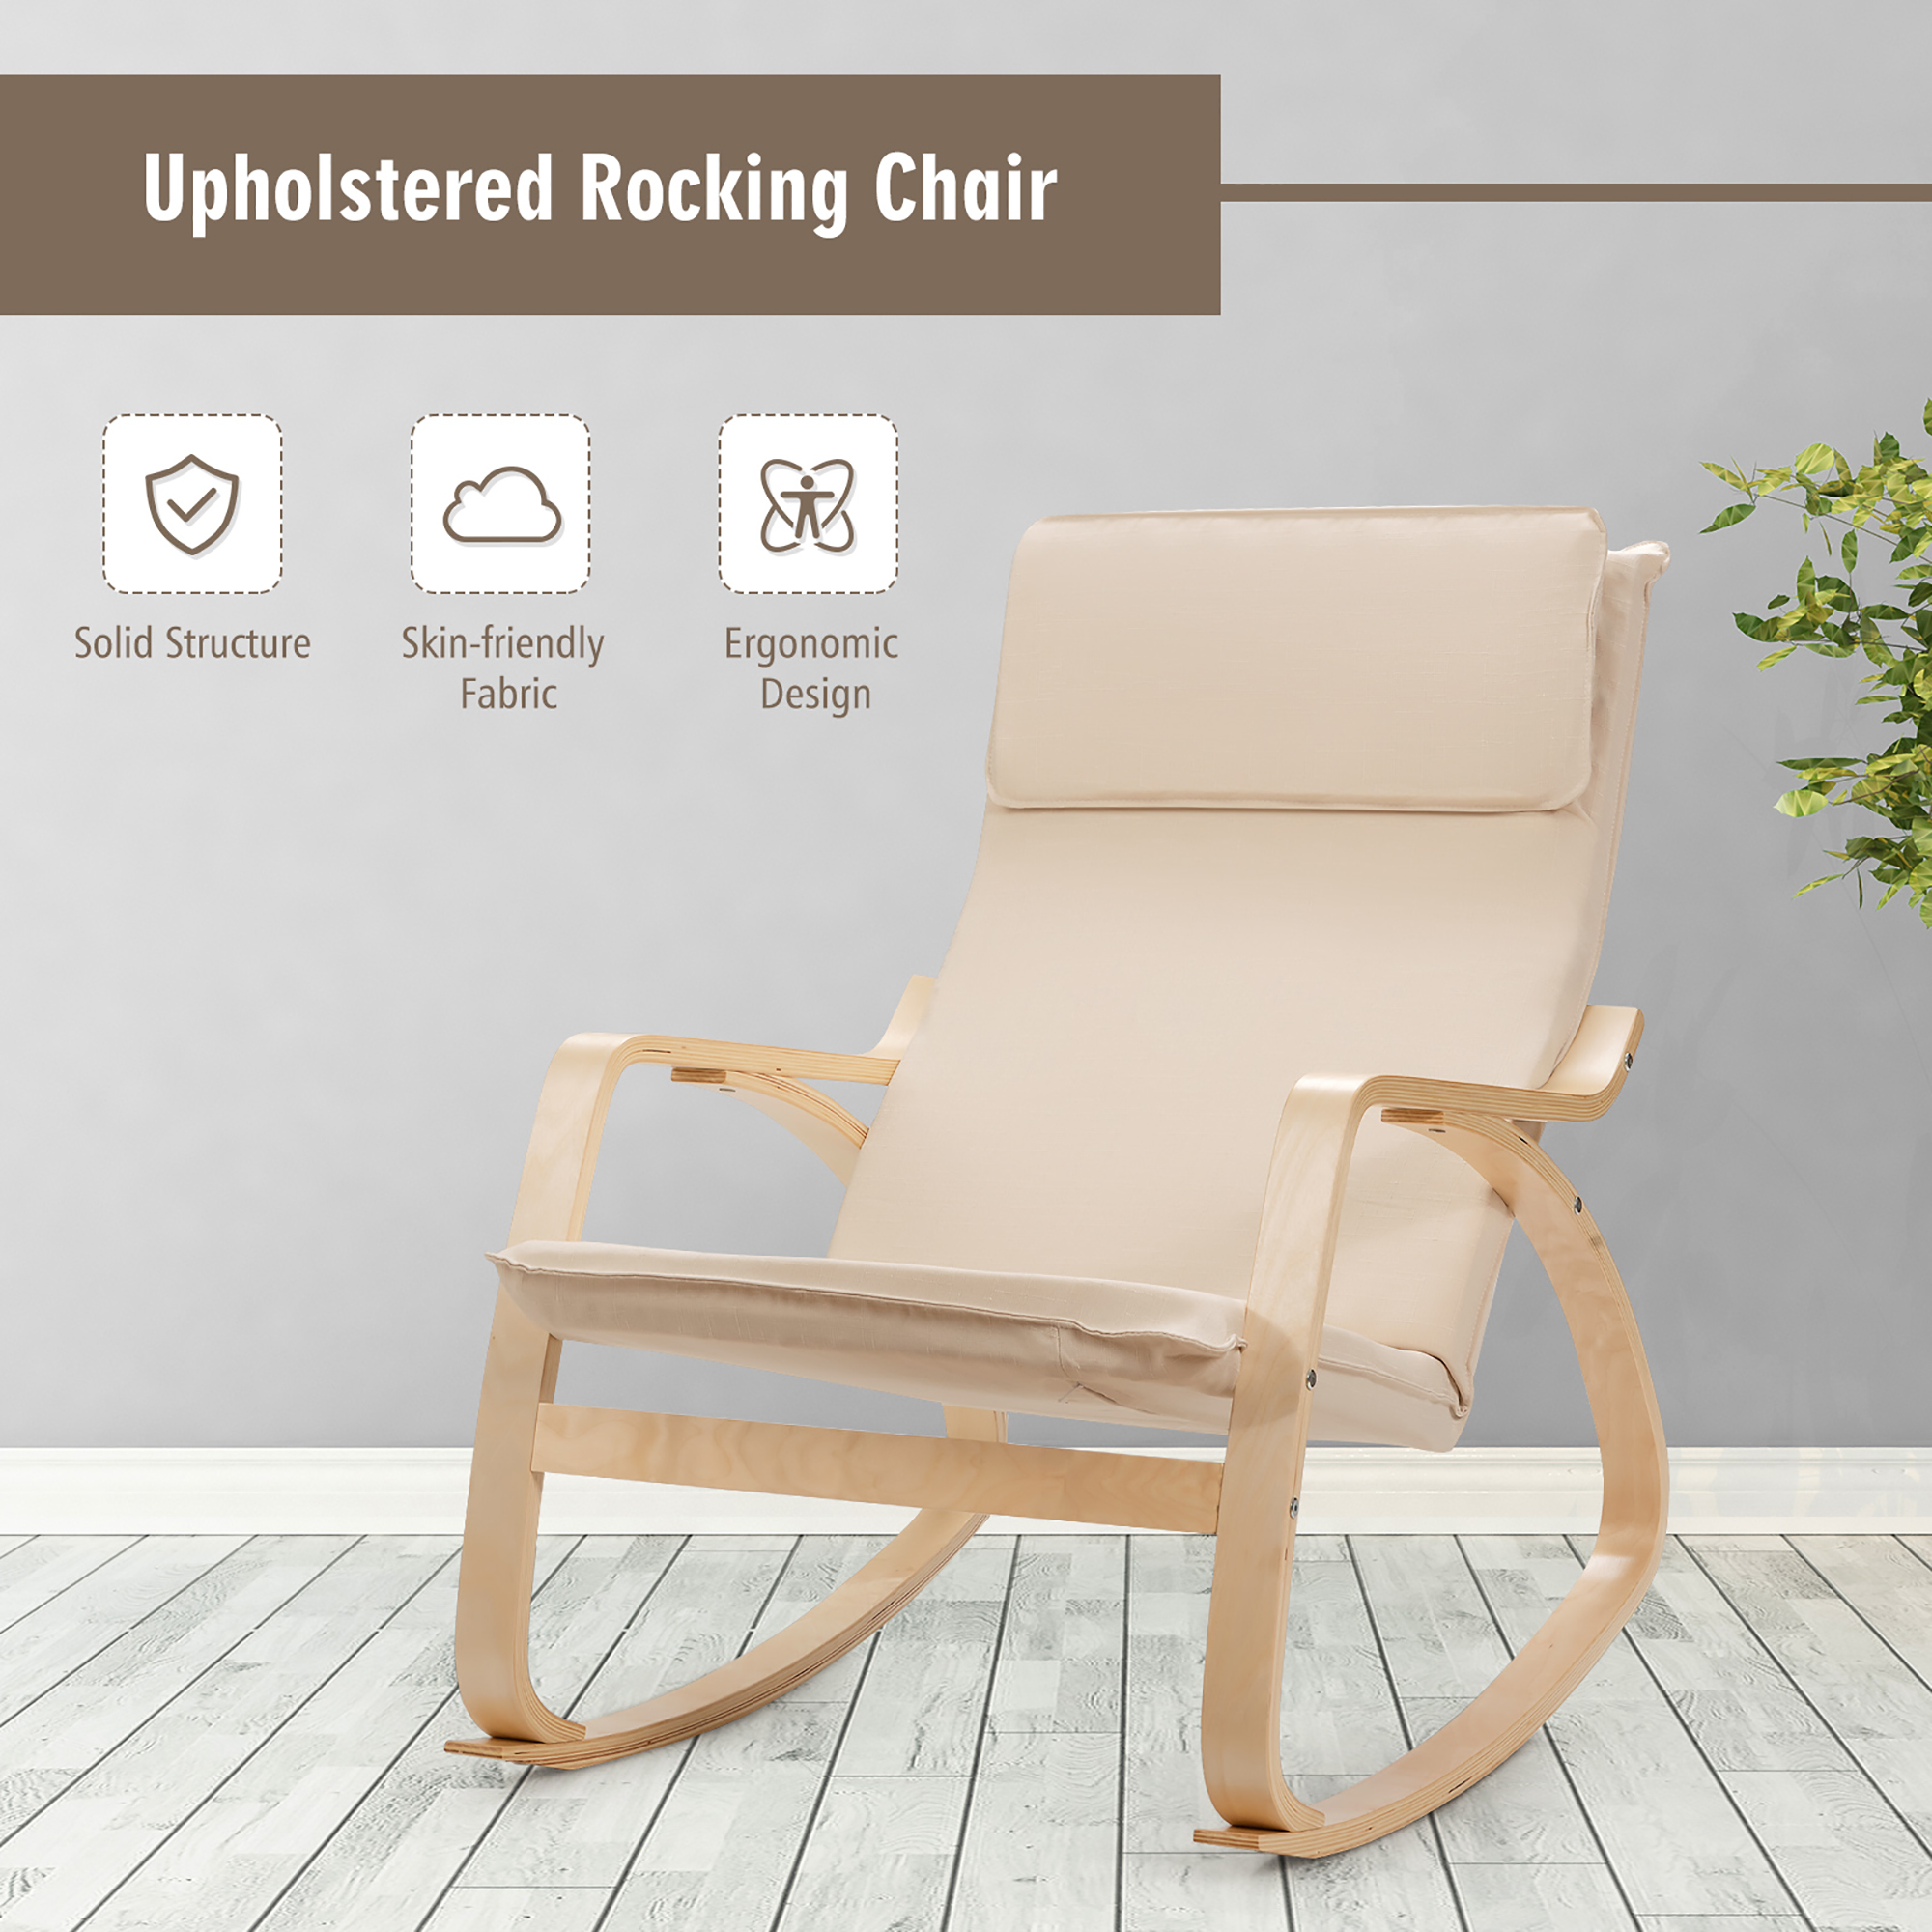 Costway Set of 2 Bentwood Rocking Chair Relax Rocker Lounge Chair w/Fabric Cushion Gray\ Beige